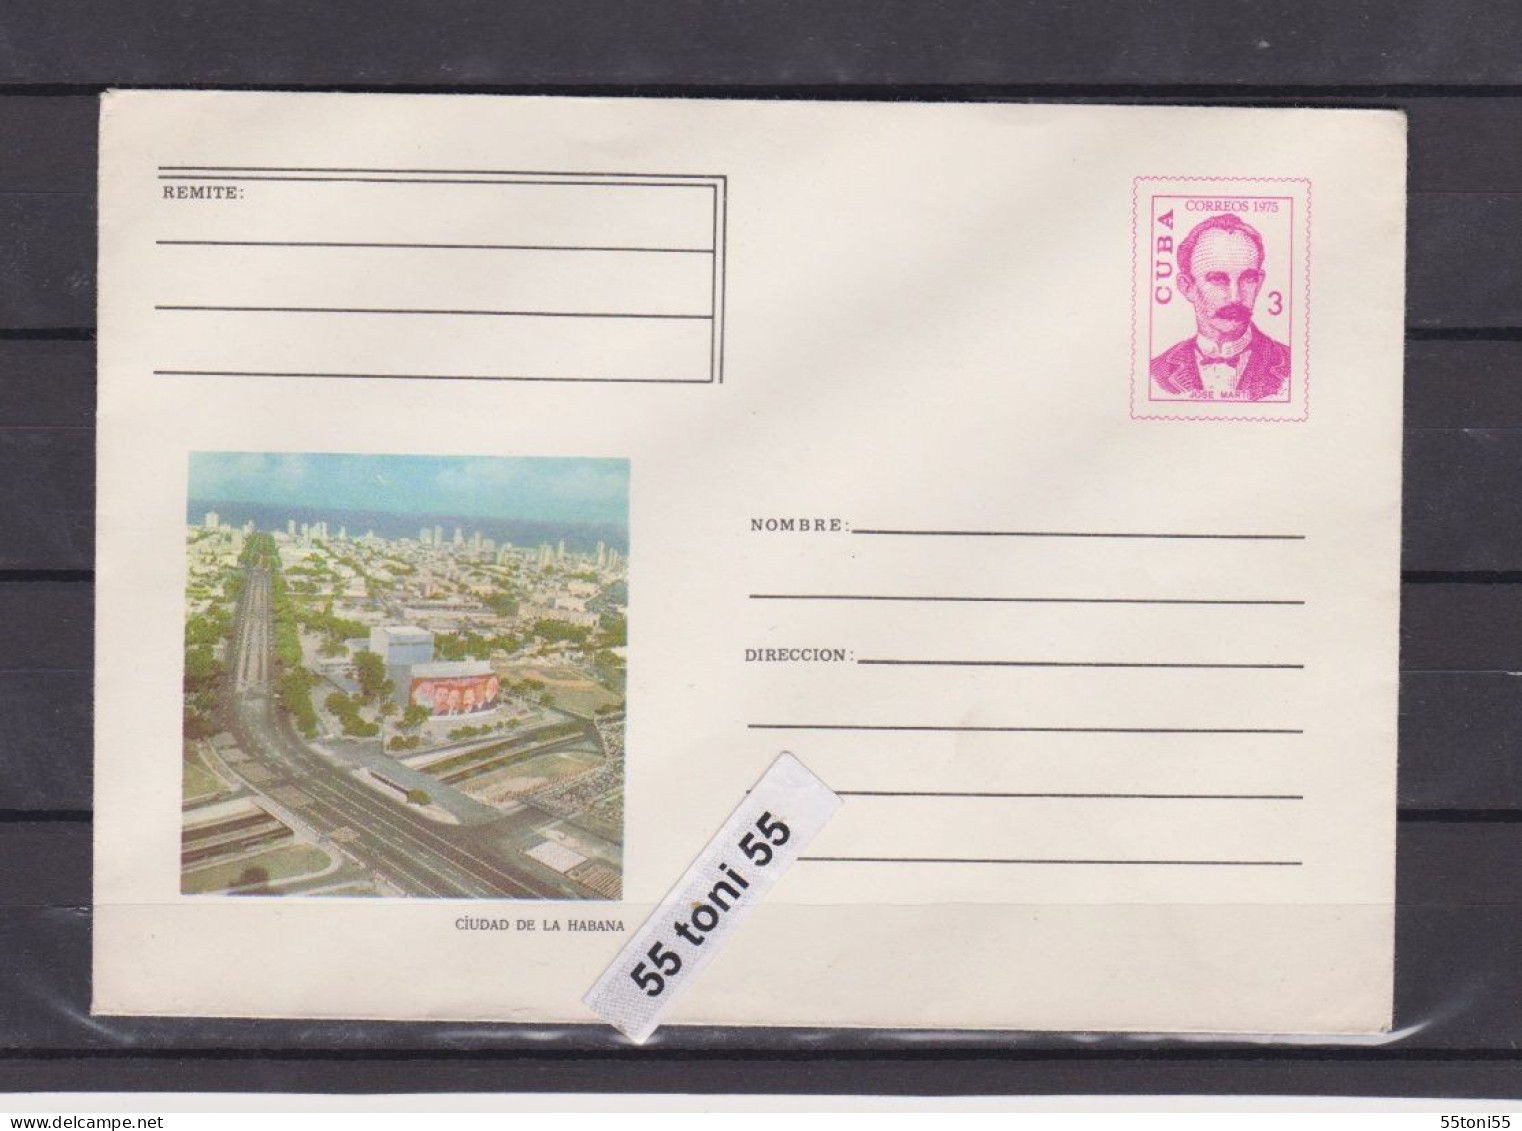 1975 VIEW OF THE CITY OF HAVANA 3c Postal Stationery. CUBA - Covers & Documents